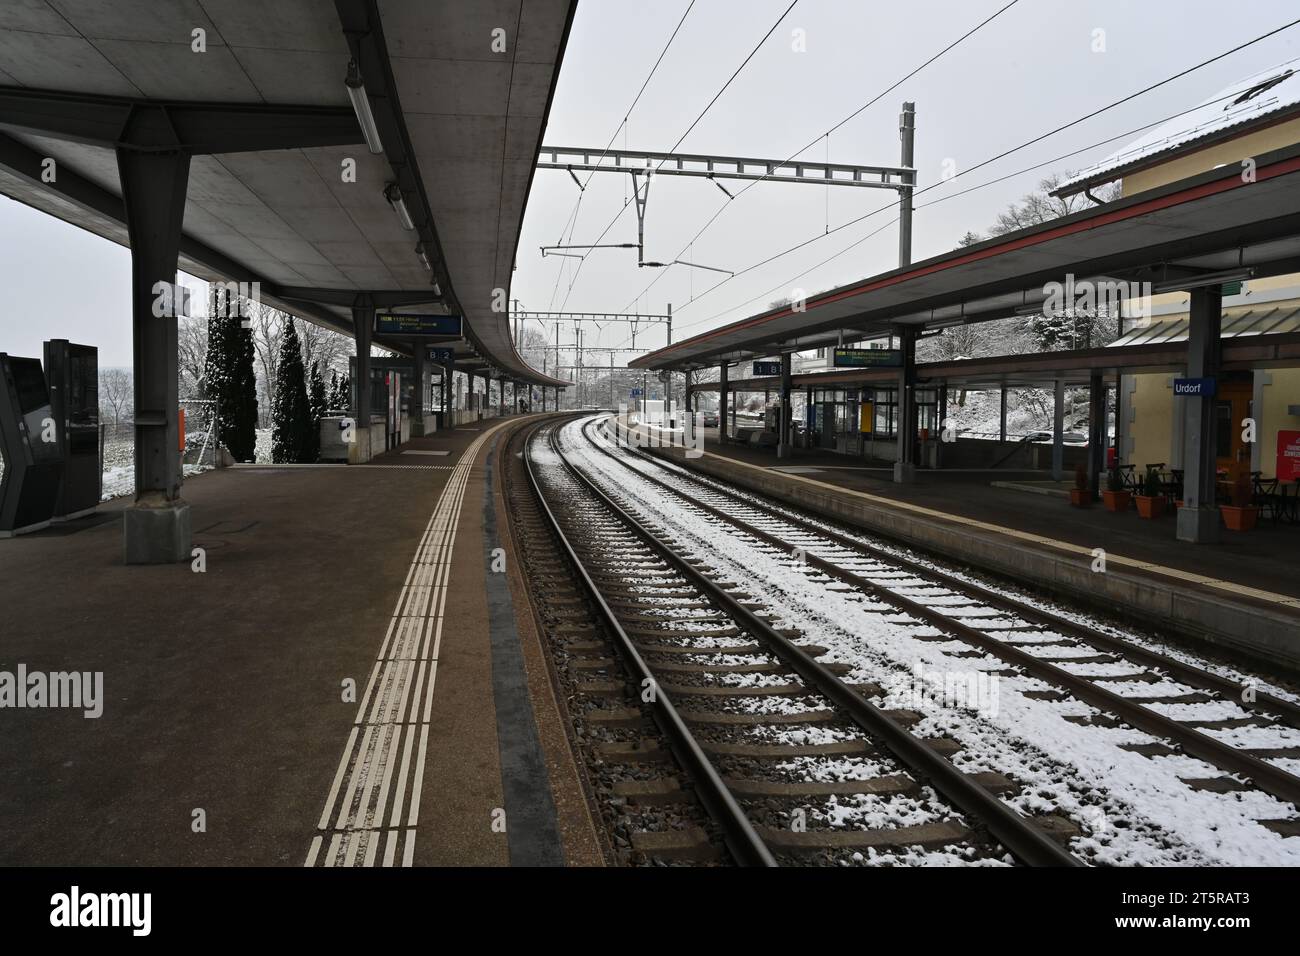 Railway platform of a small village station in winter. There is snow on the railway tracks. Stock Photo